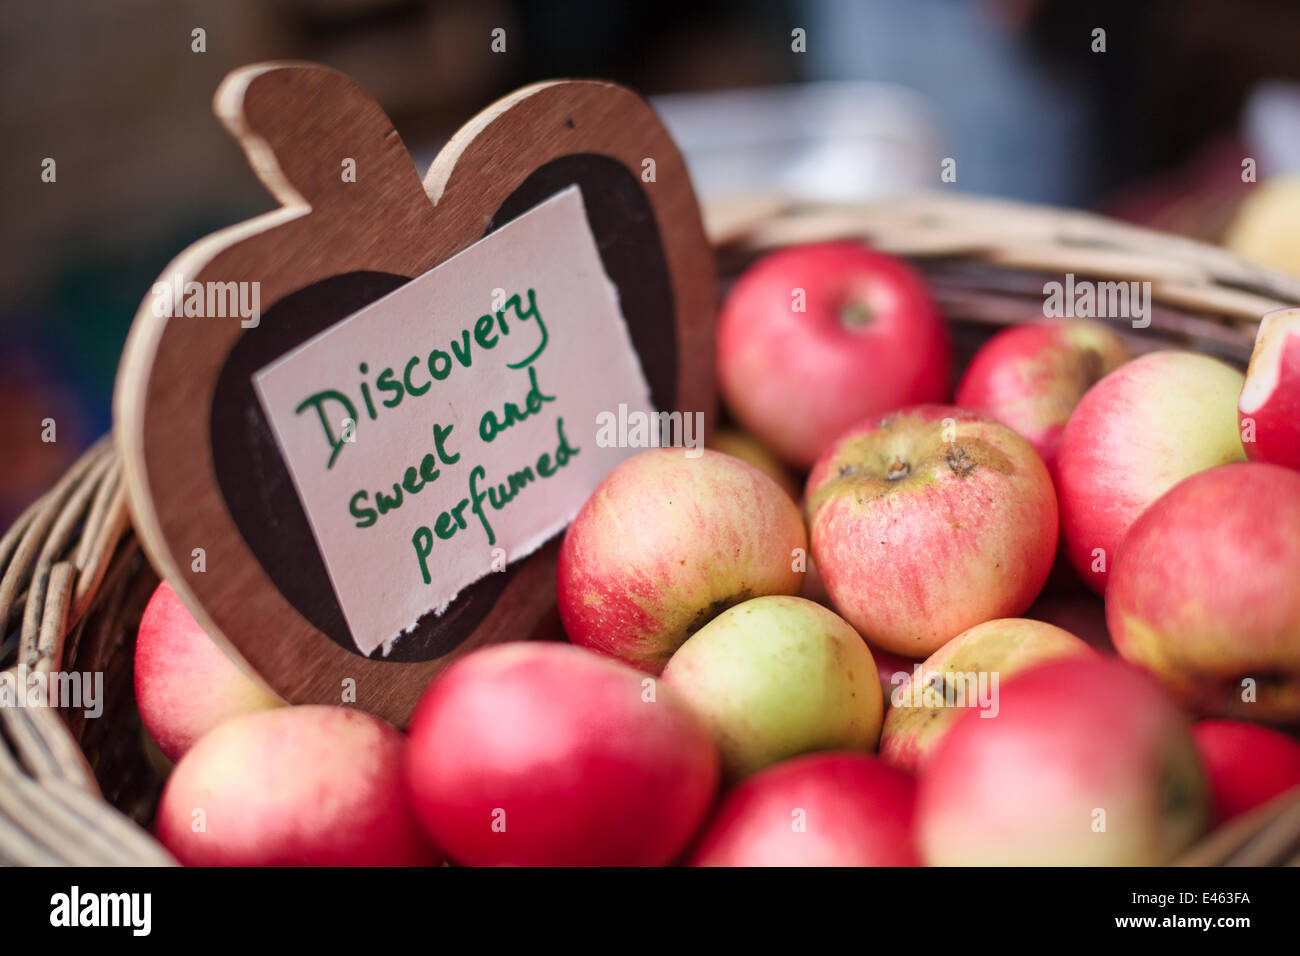 Hand picked heritage apples, Discovery, in a basket, Stroud Farmers Market, Stroud, Gloucestershire, UK, August 2011. Stock Photo